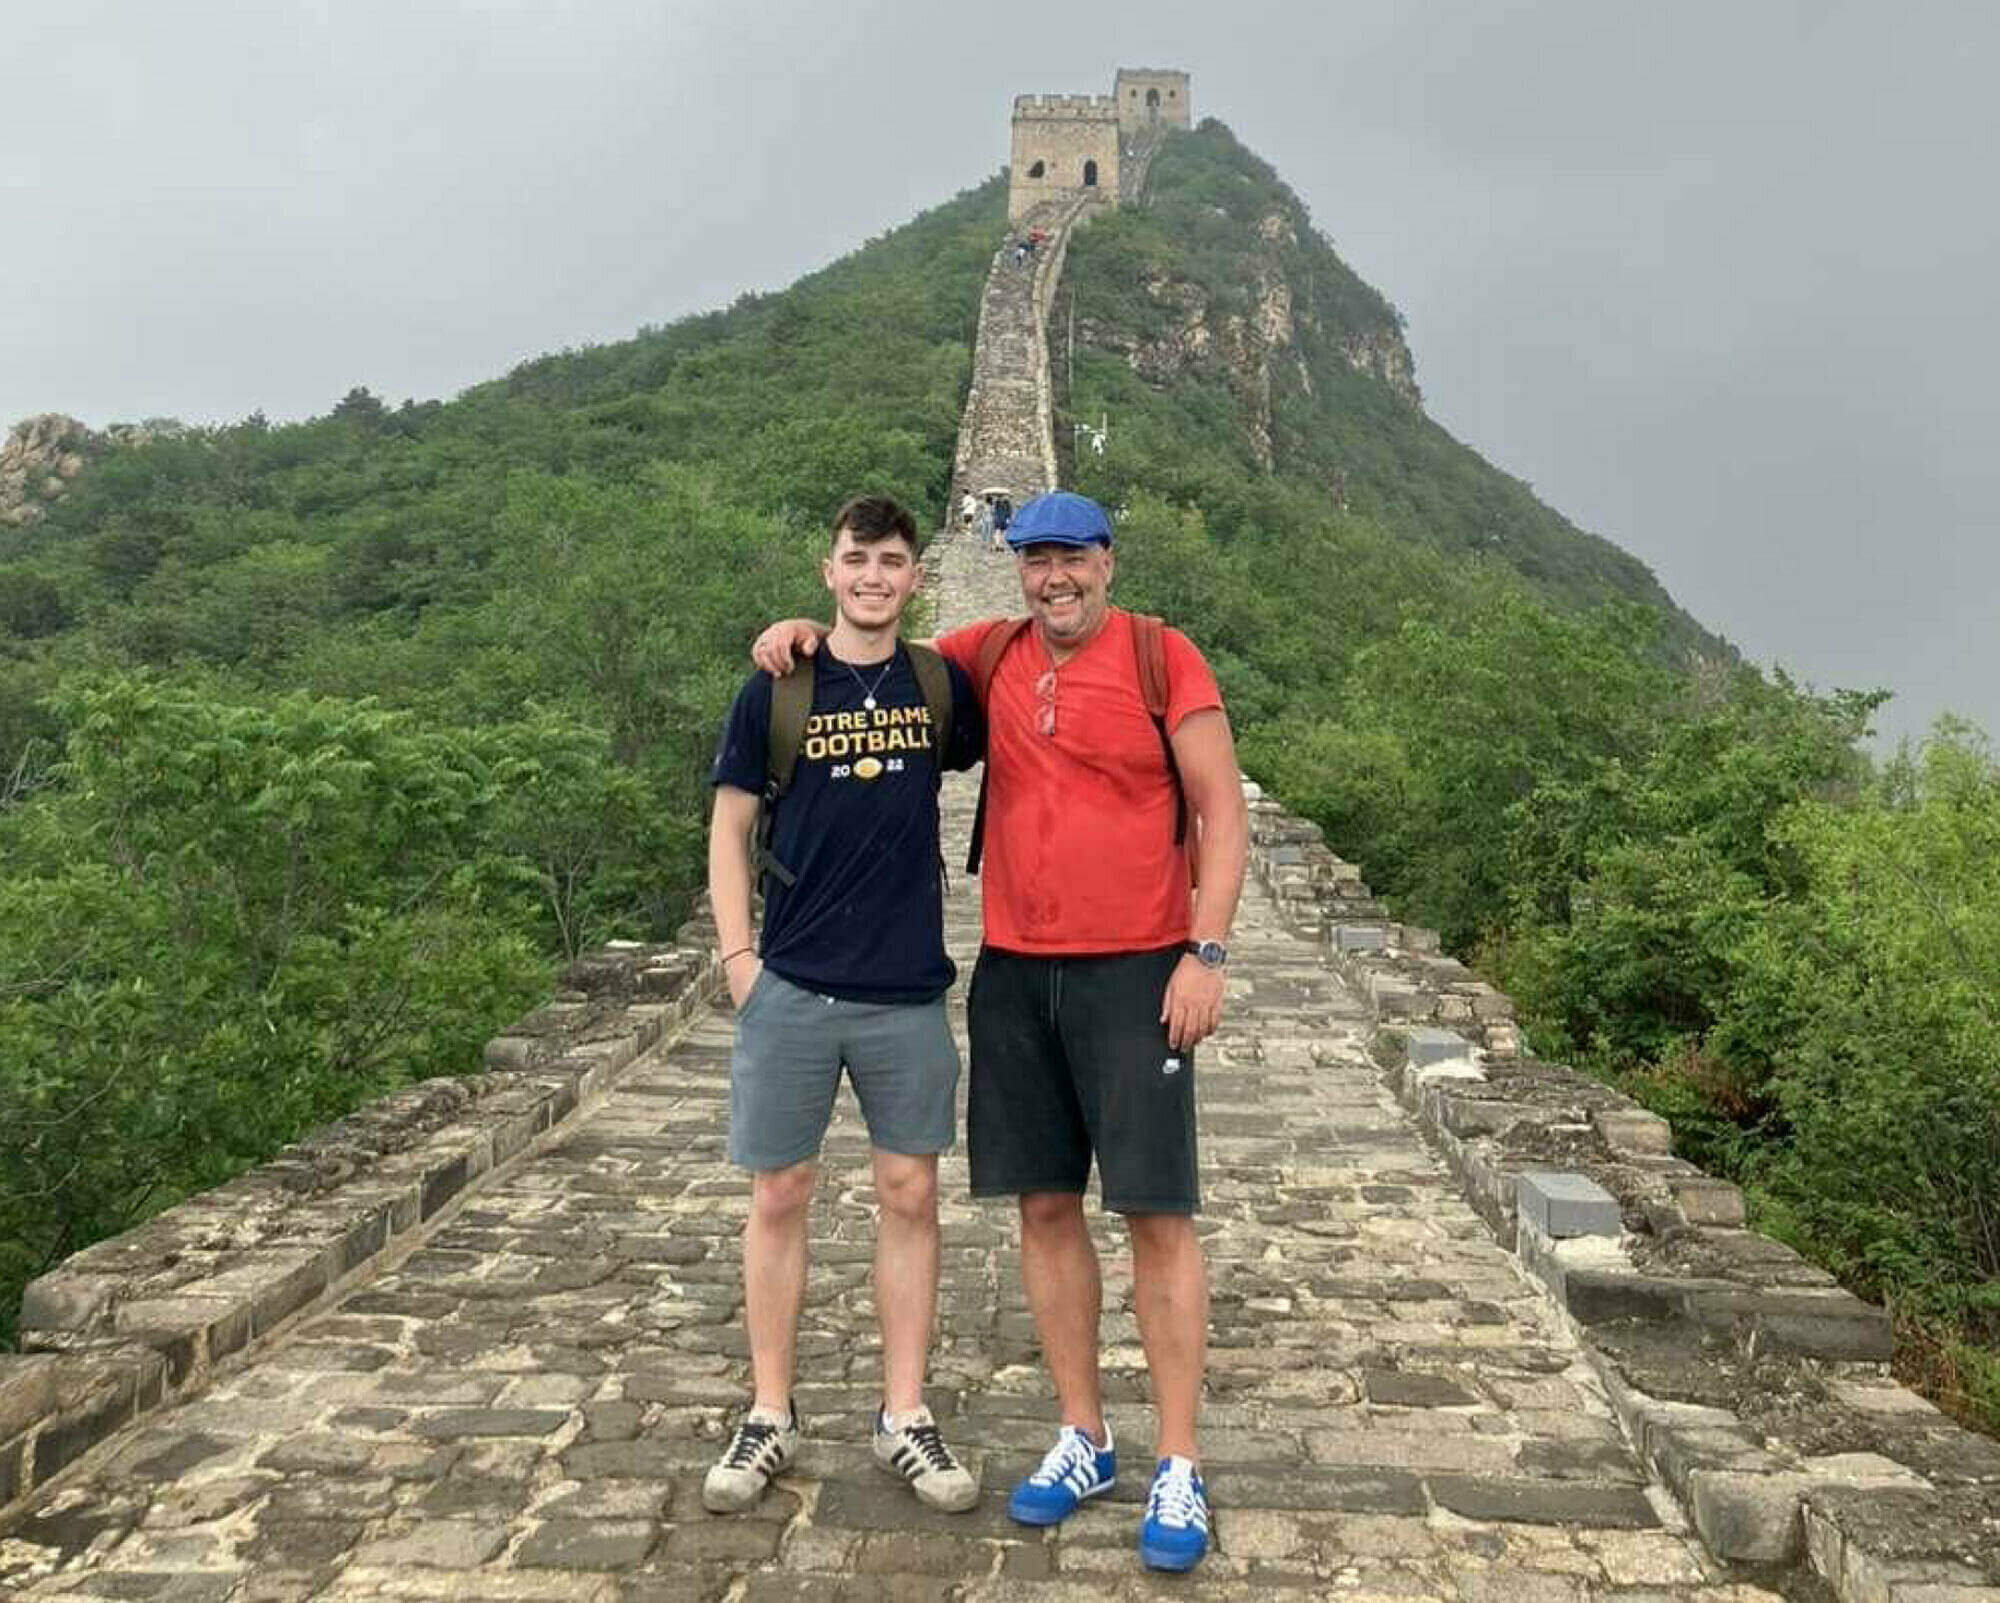 Fionn Barr, a rising Senior majoring in Political Science and History. Originally from Ireland, Fionn is currently an exchange student at Peking University and is interning this summer for Notre Dame Beijing.